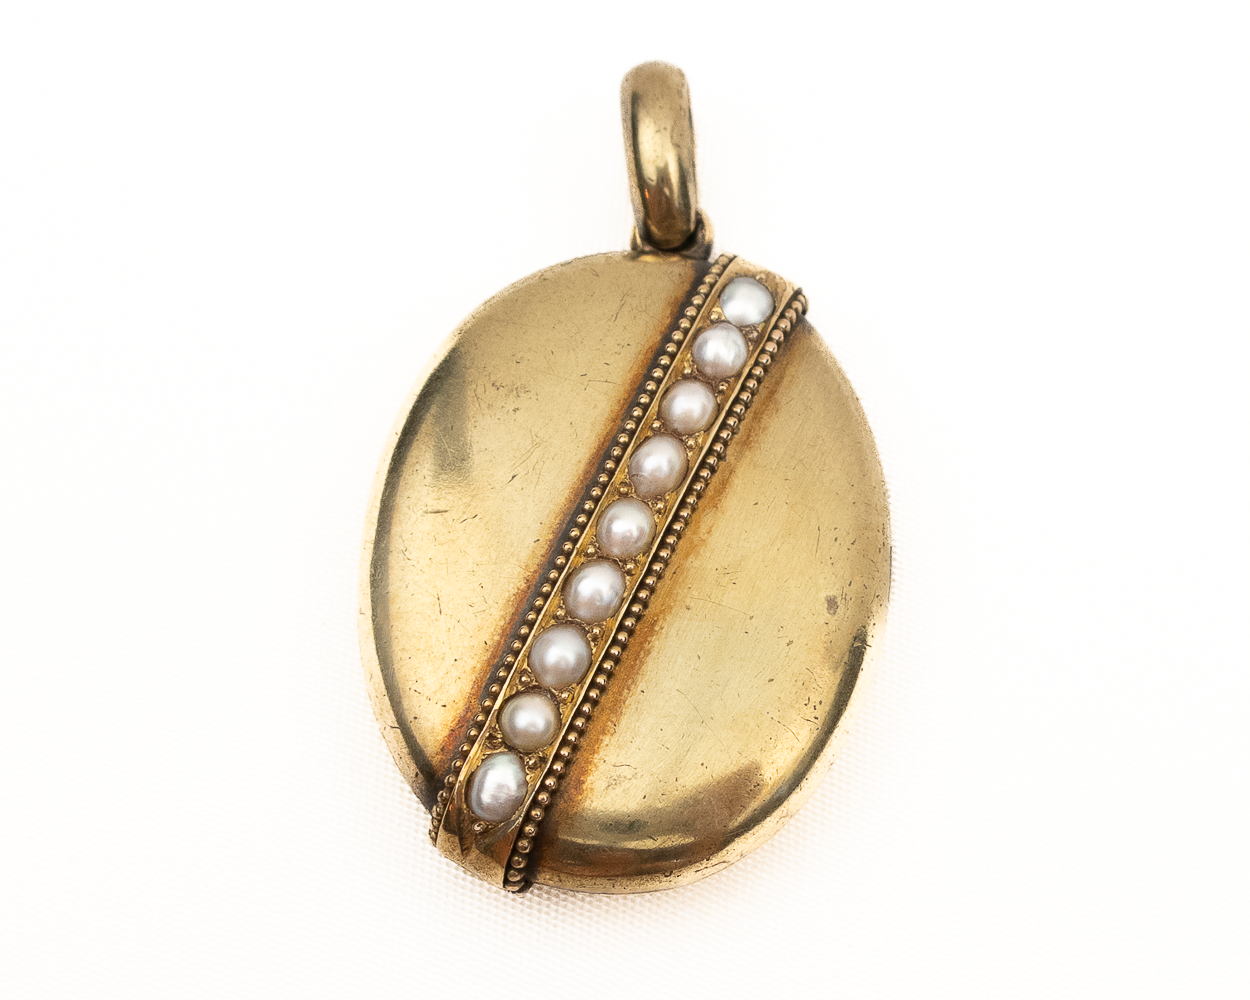 15KT Victorian Locket with Pearls